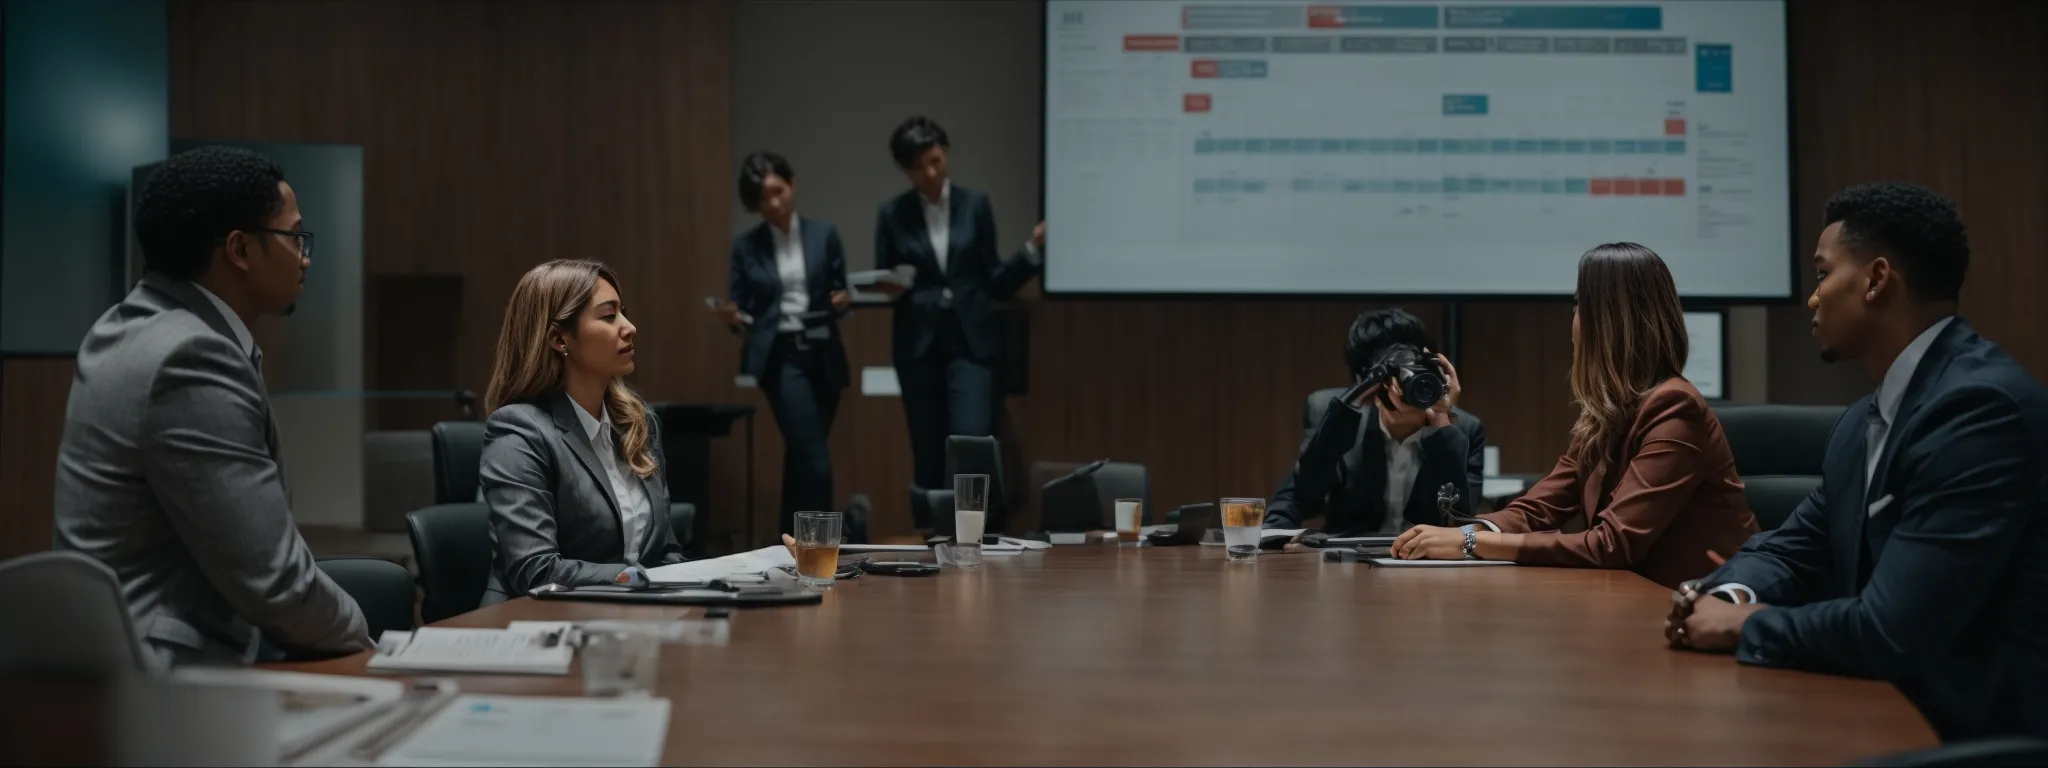 a diverse team engaging in a collaborative discussion around a large conference table with a digital calendar displayed on a screen in the background.